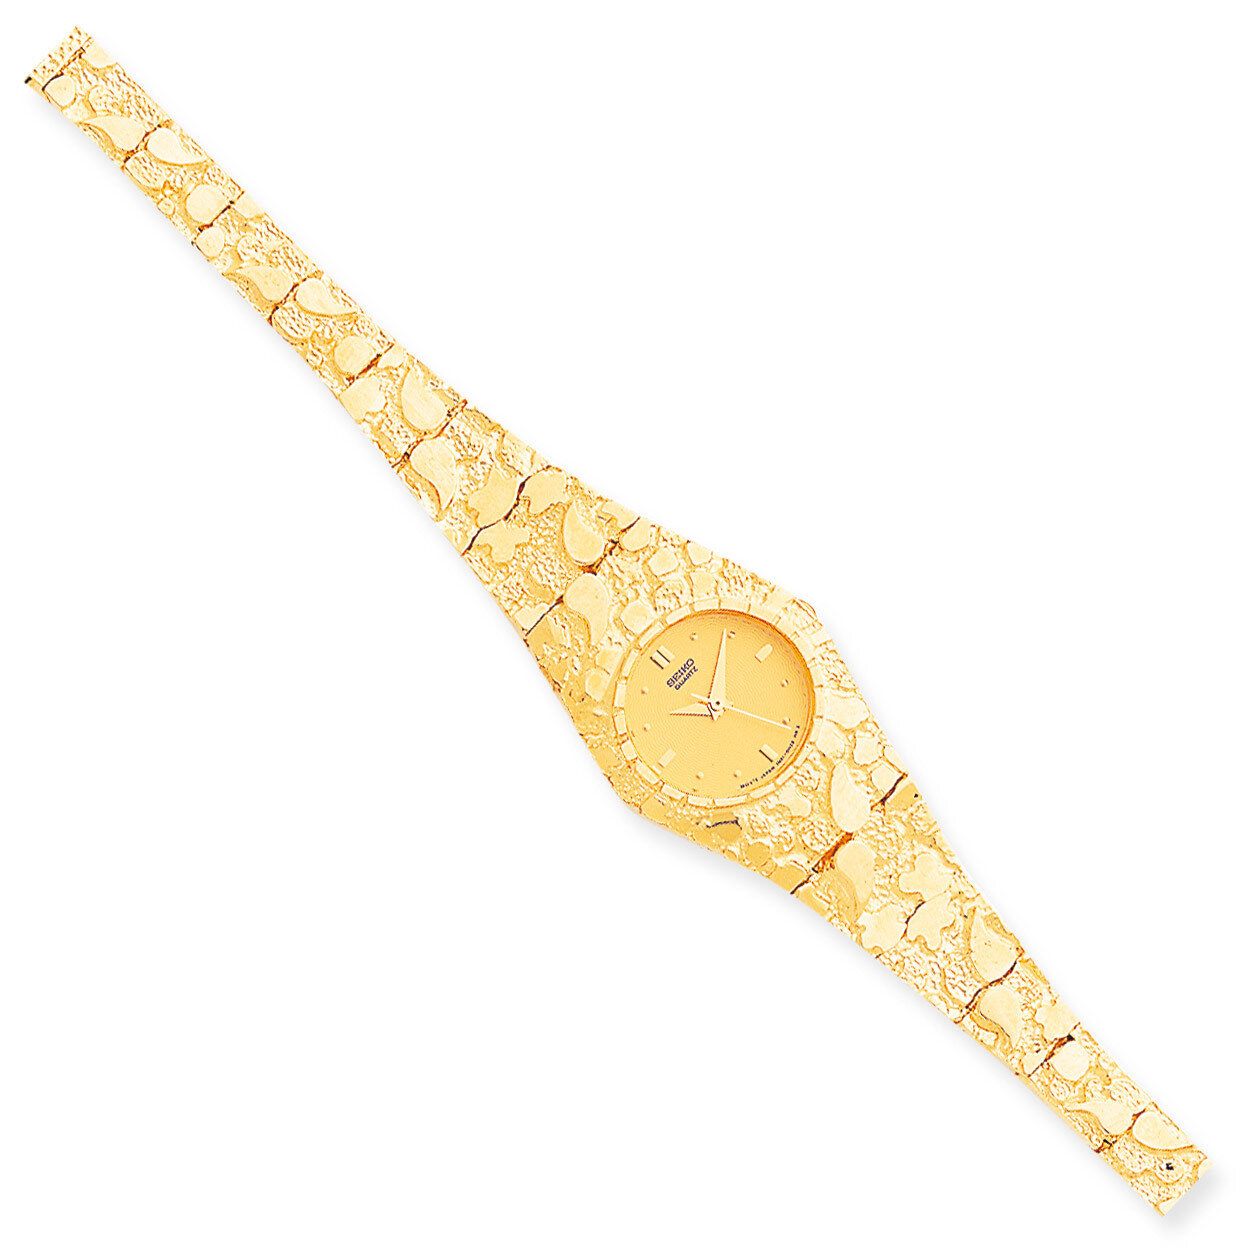 Champagne 22mm Dial Nugget Watch 10k Gold 10N260Y-7